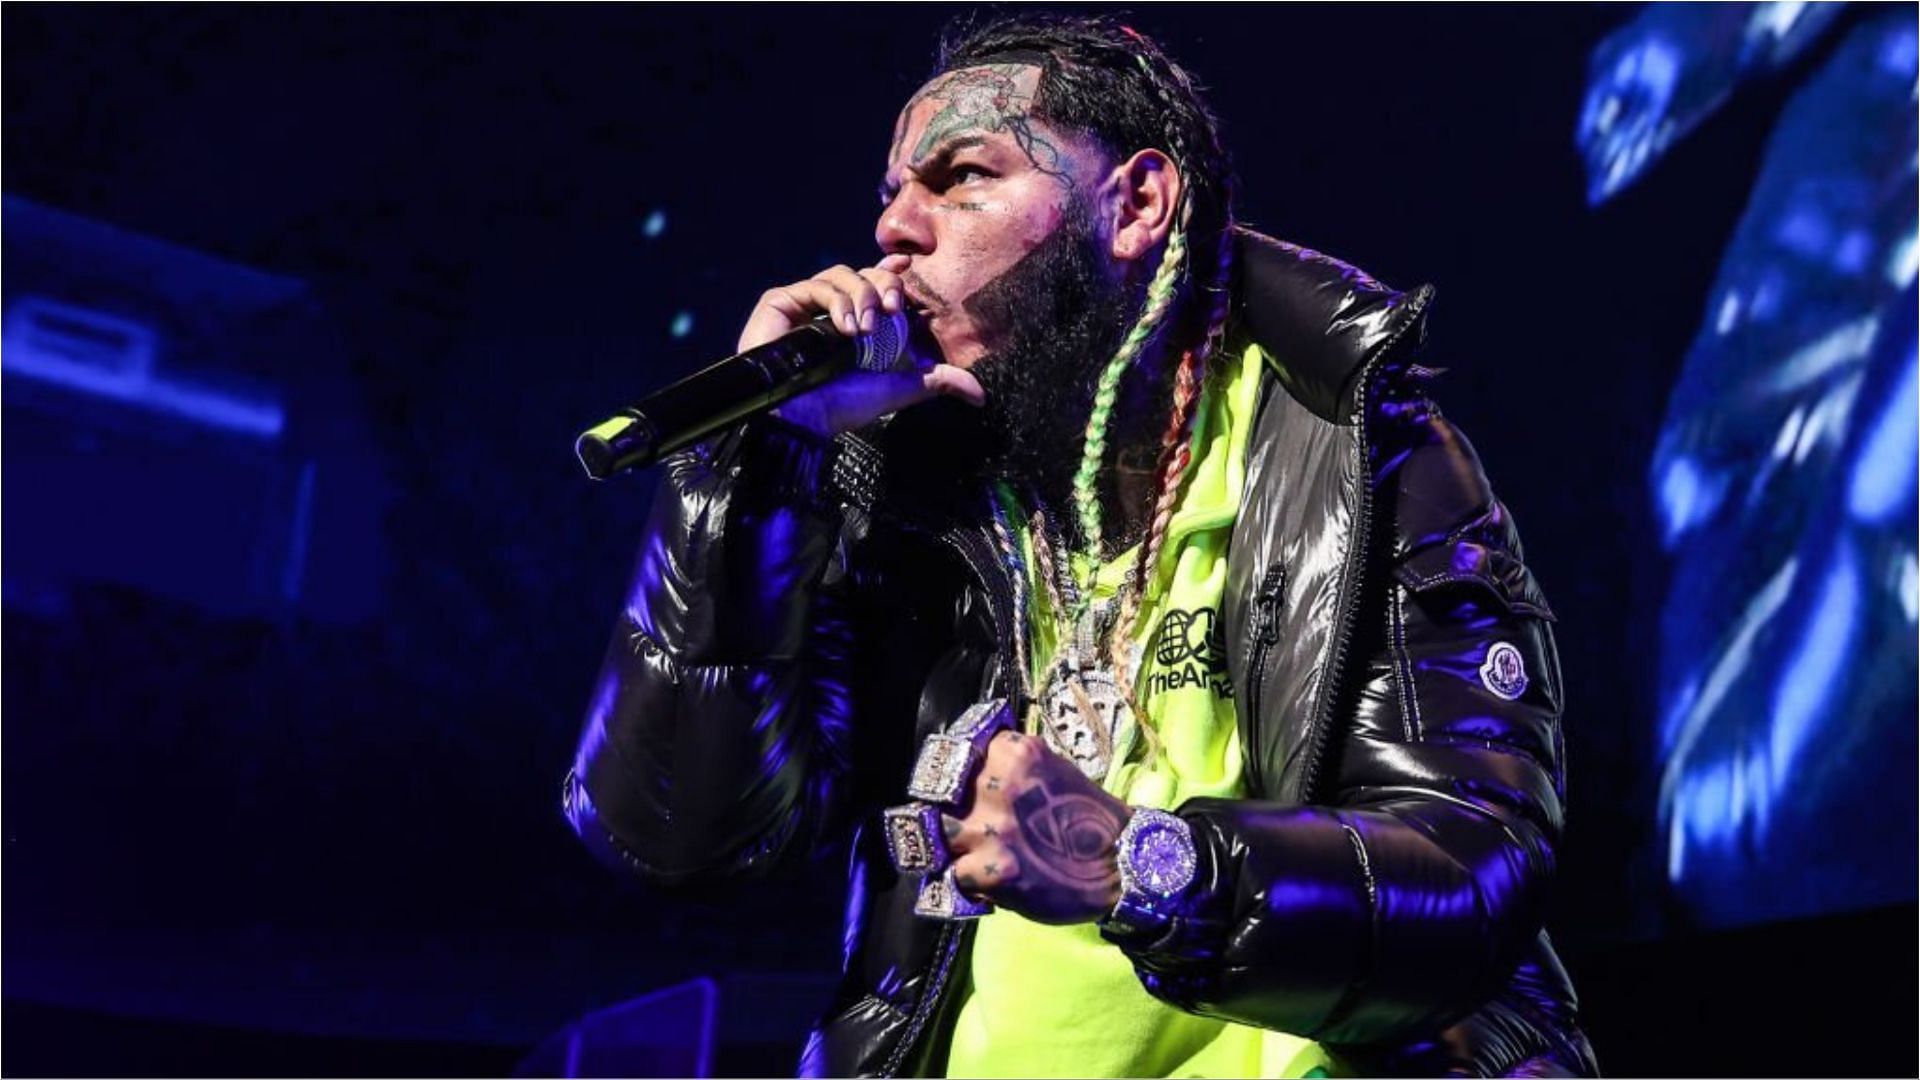 6ix9ine was taken to the hospital after being attacked inside a sauna (Image via John Parra/Getty Images)